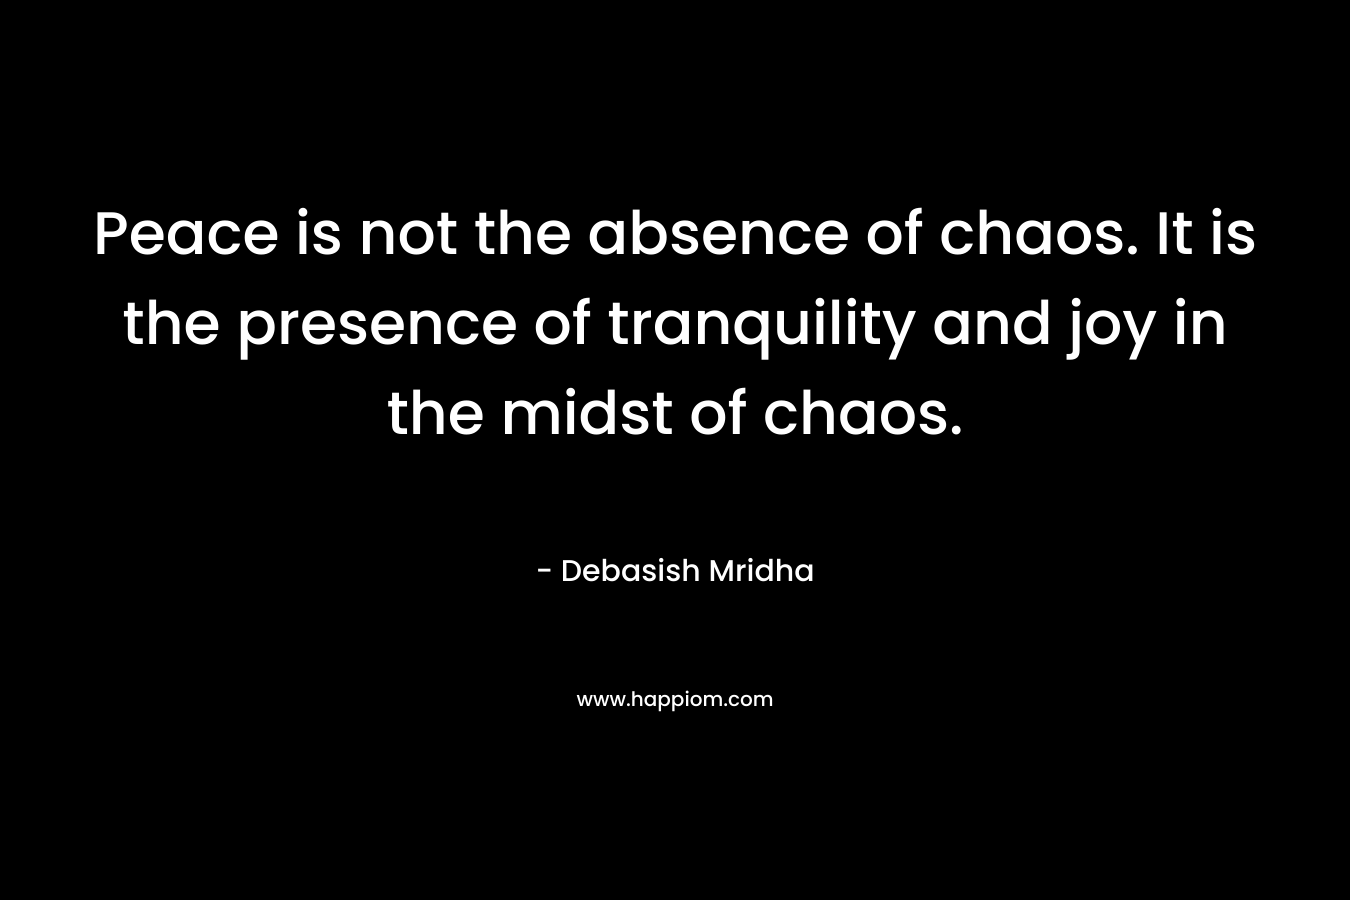 Peace is not the absence of chaos. It is the presence of tranquility and joy in the midst of chaos.